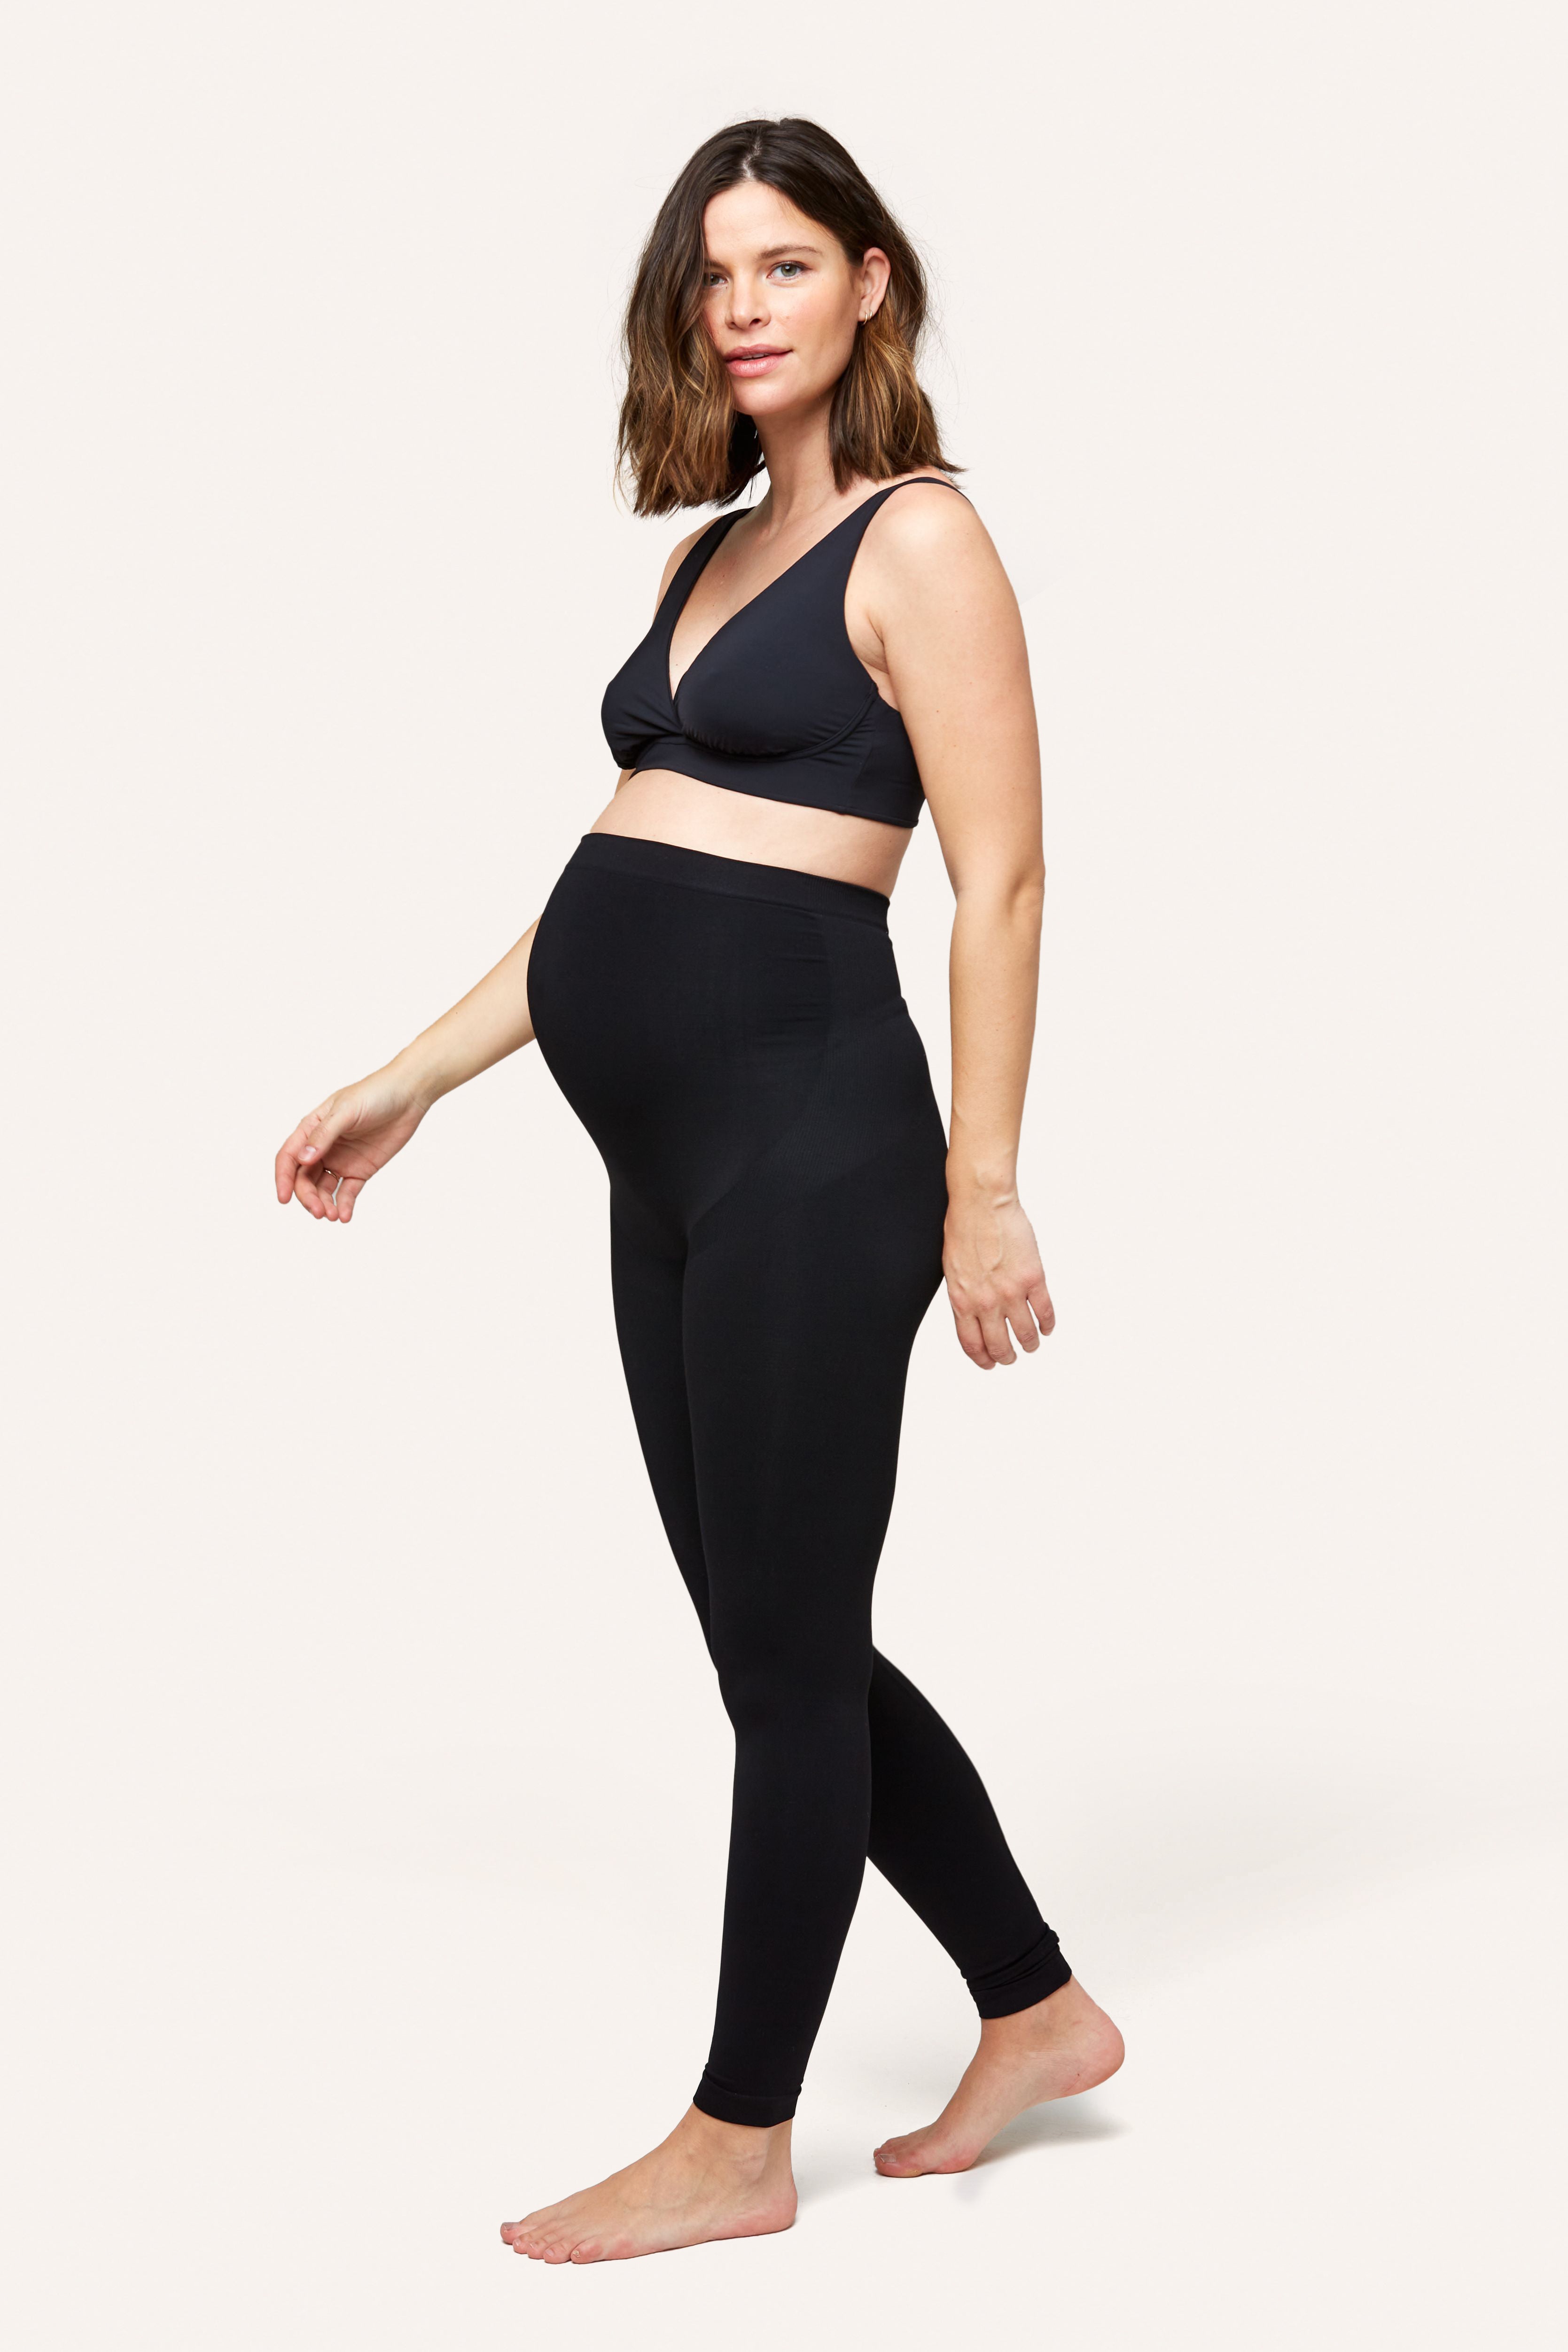 NOTHING FITS BUT Women's Classic Seamless Maternity Leggings, Belly Support  Pants, Everyday Maternity Pants, Black wear, S at  Women's Clothing  store